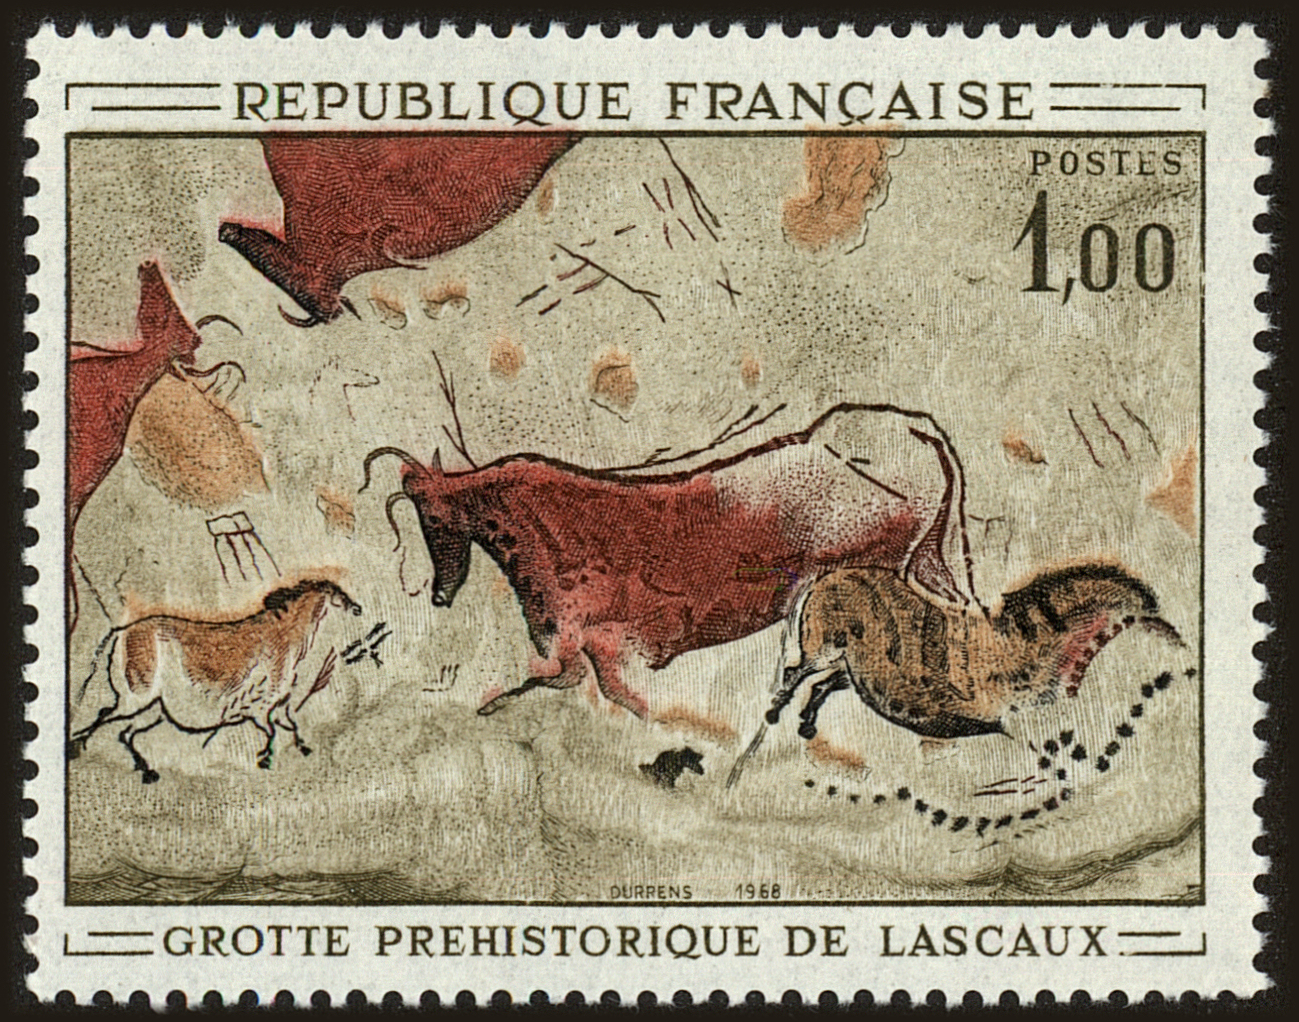 Front view of France 1204 collectors stamp